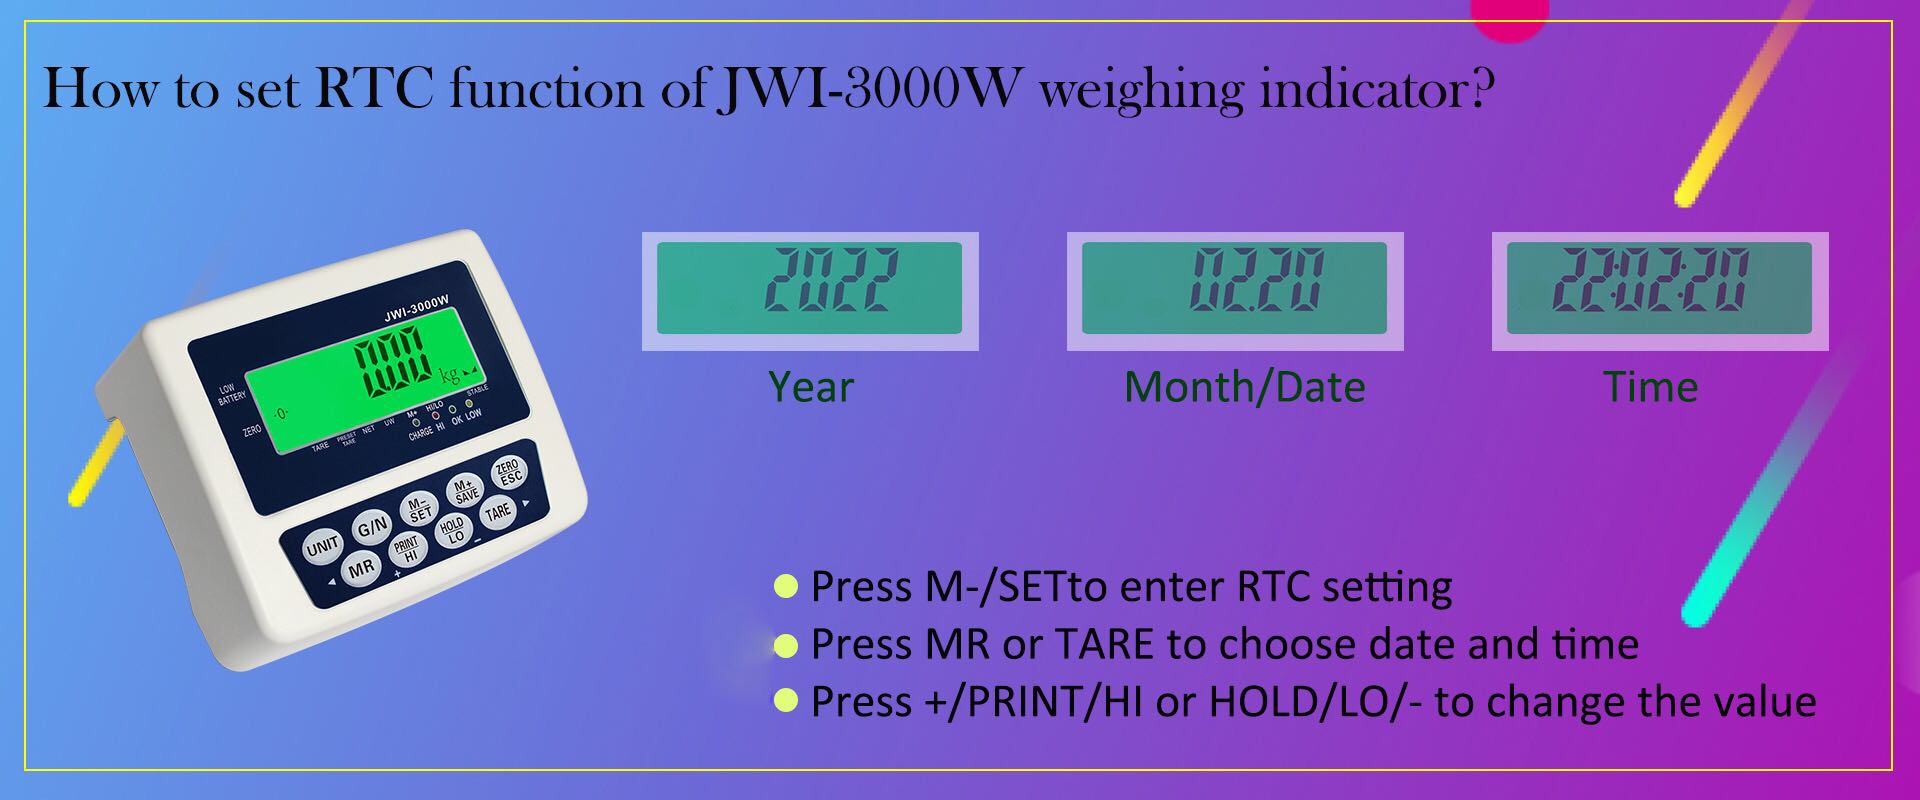 How to set RTC function of JWI-3000W Industrial Weighing Indicator